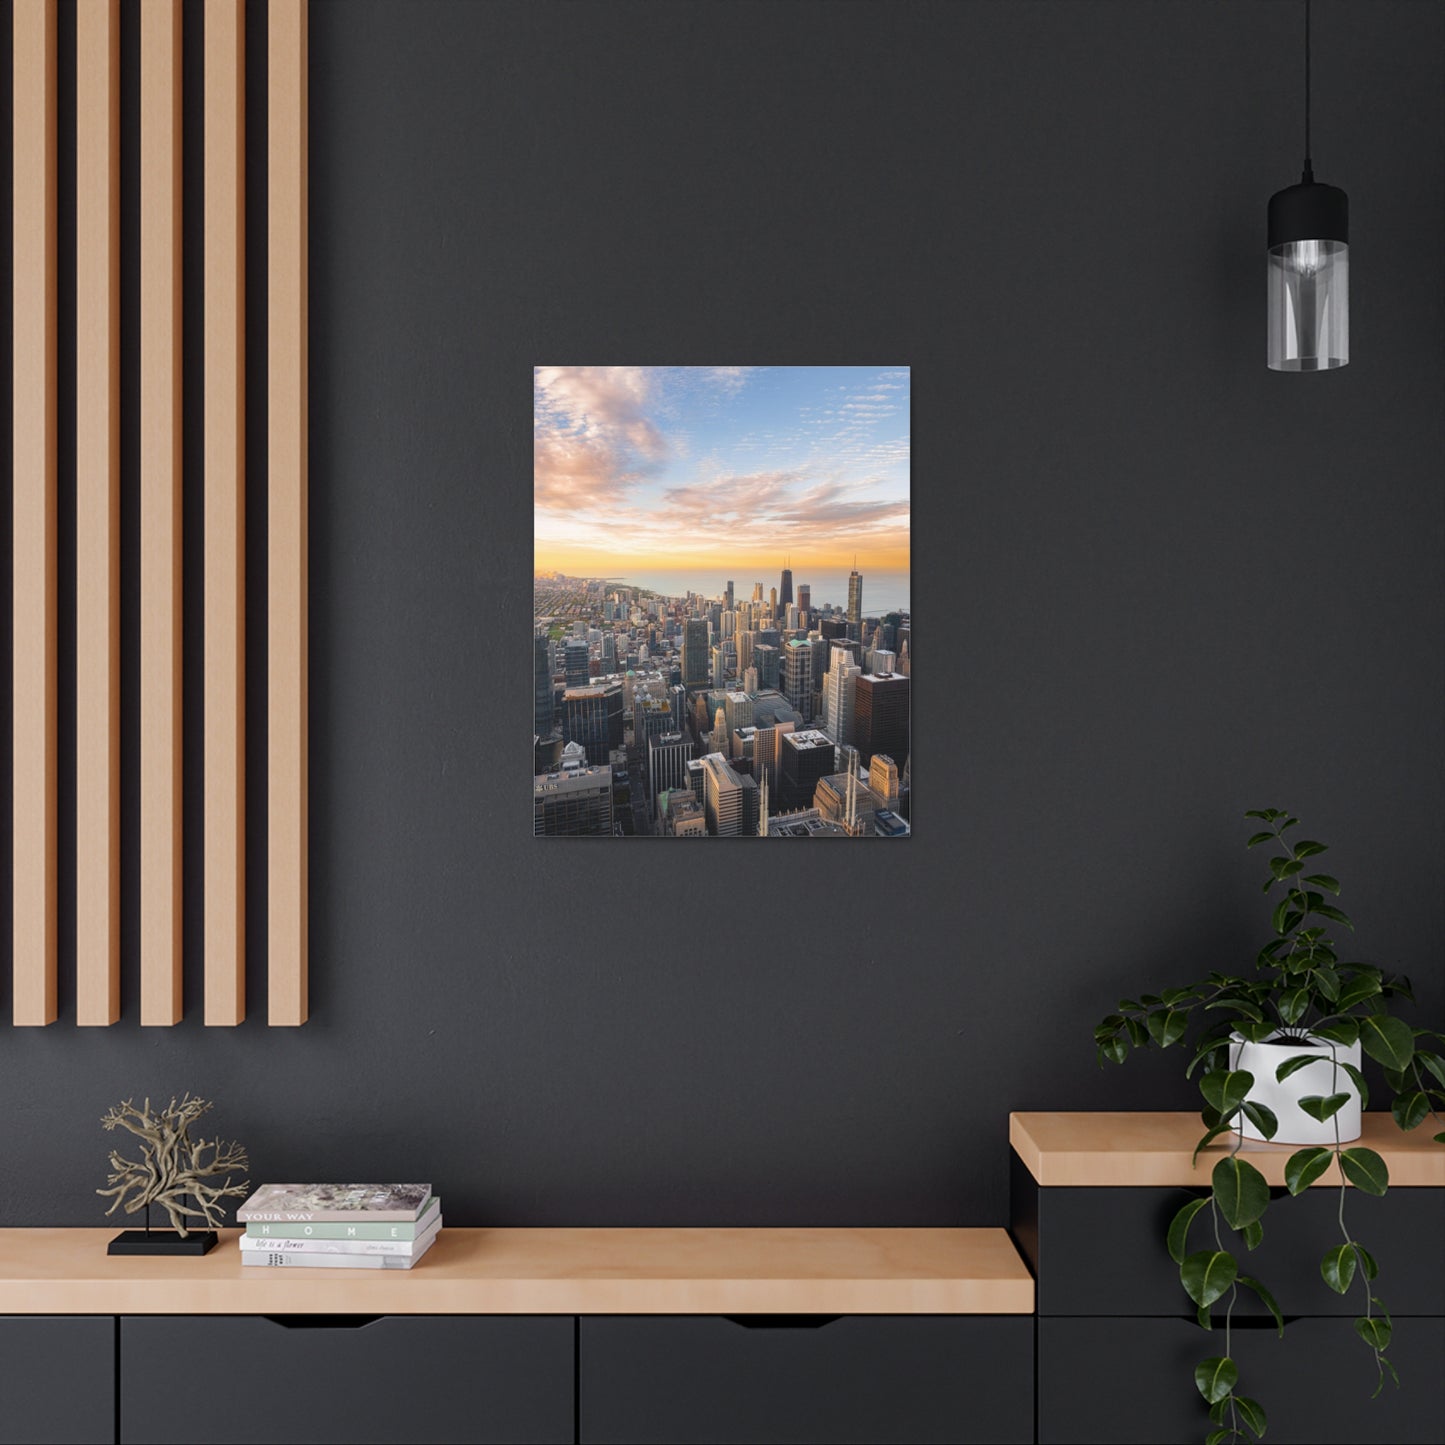 Chicago Skyline Sunset Over Lake Michigan - Canvas Wall Print (Free Shipping)